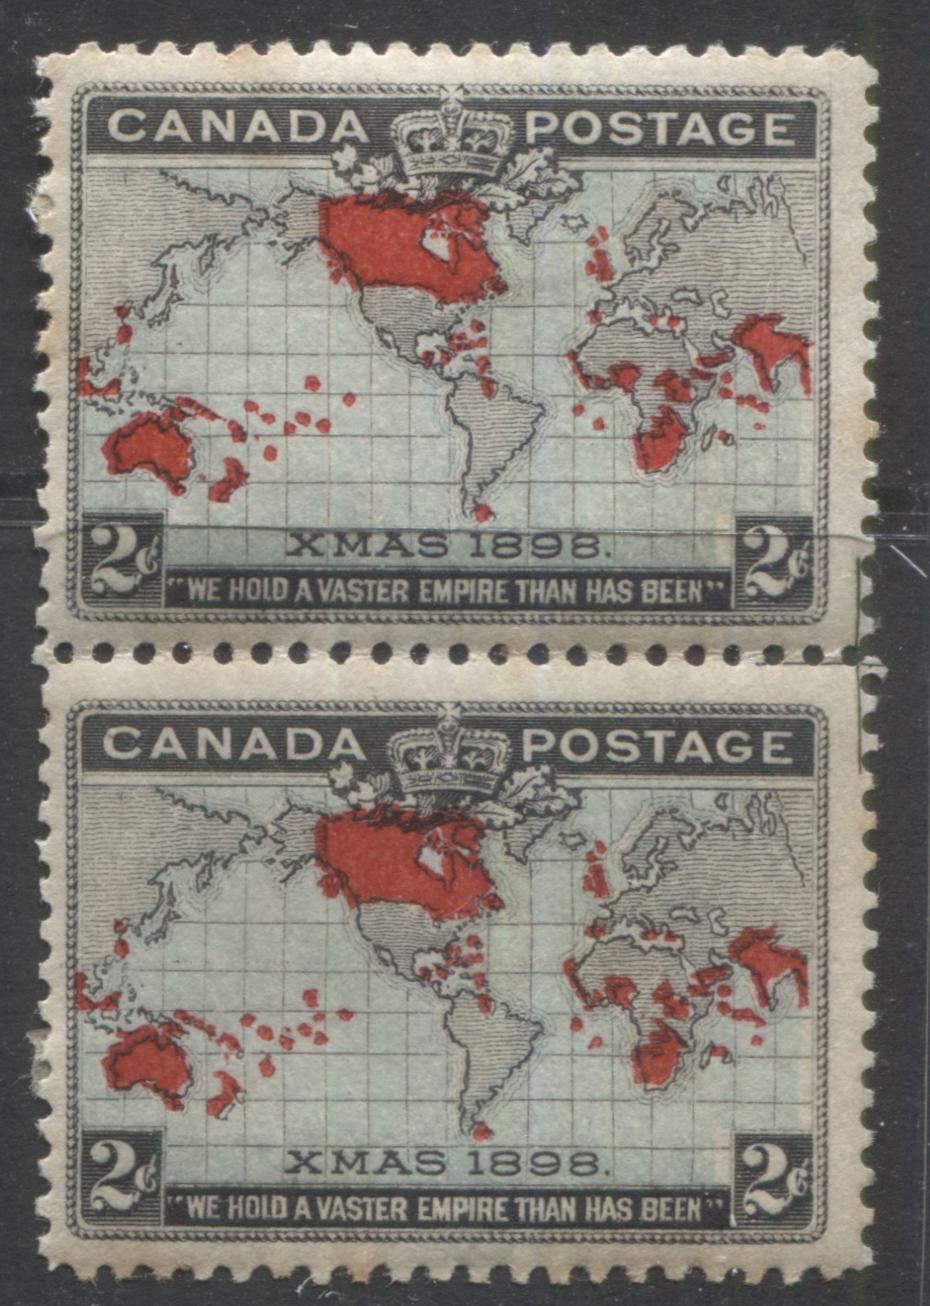 Lot 94 Canada #86 2c Black, Blue & Carmine Mercator's Projection, 1898 Imperial Penny Postage Issue, A Fine OG Vertical Pair With Extra Islands & Perforation Cross Guide